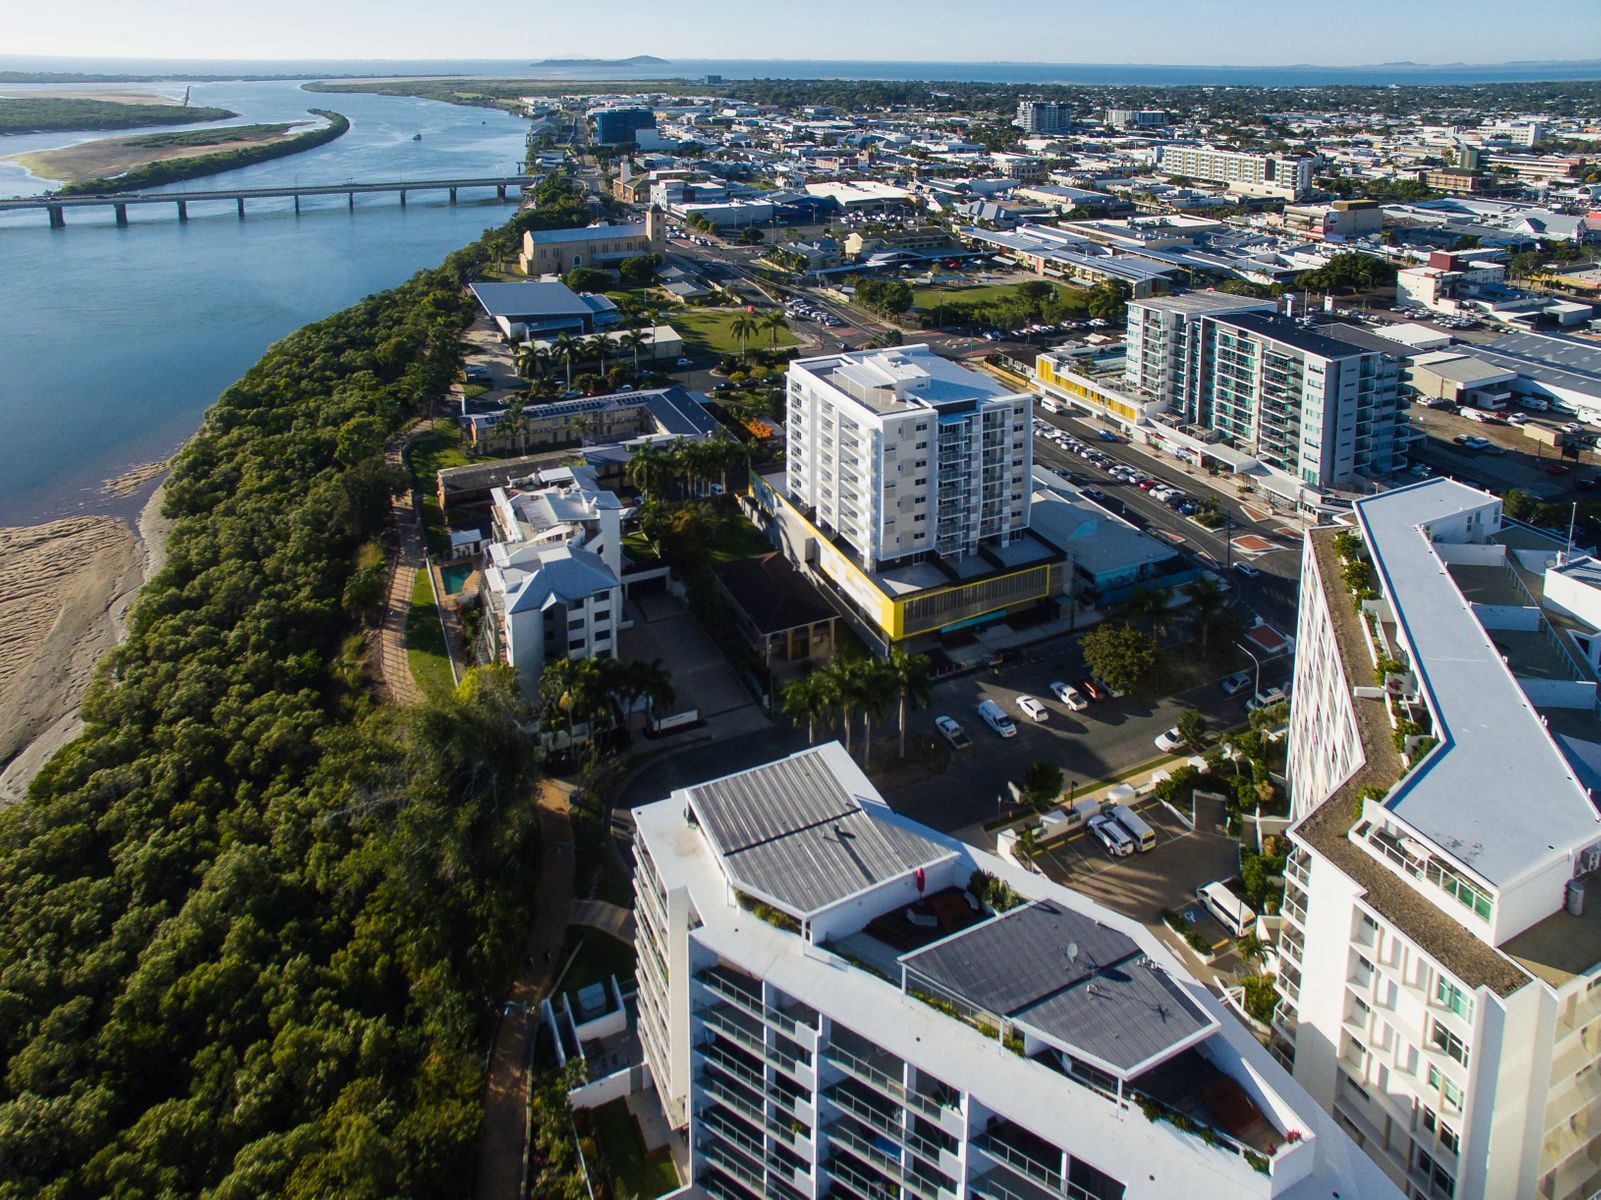 Mackay; The City at the Hub of our Region